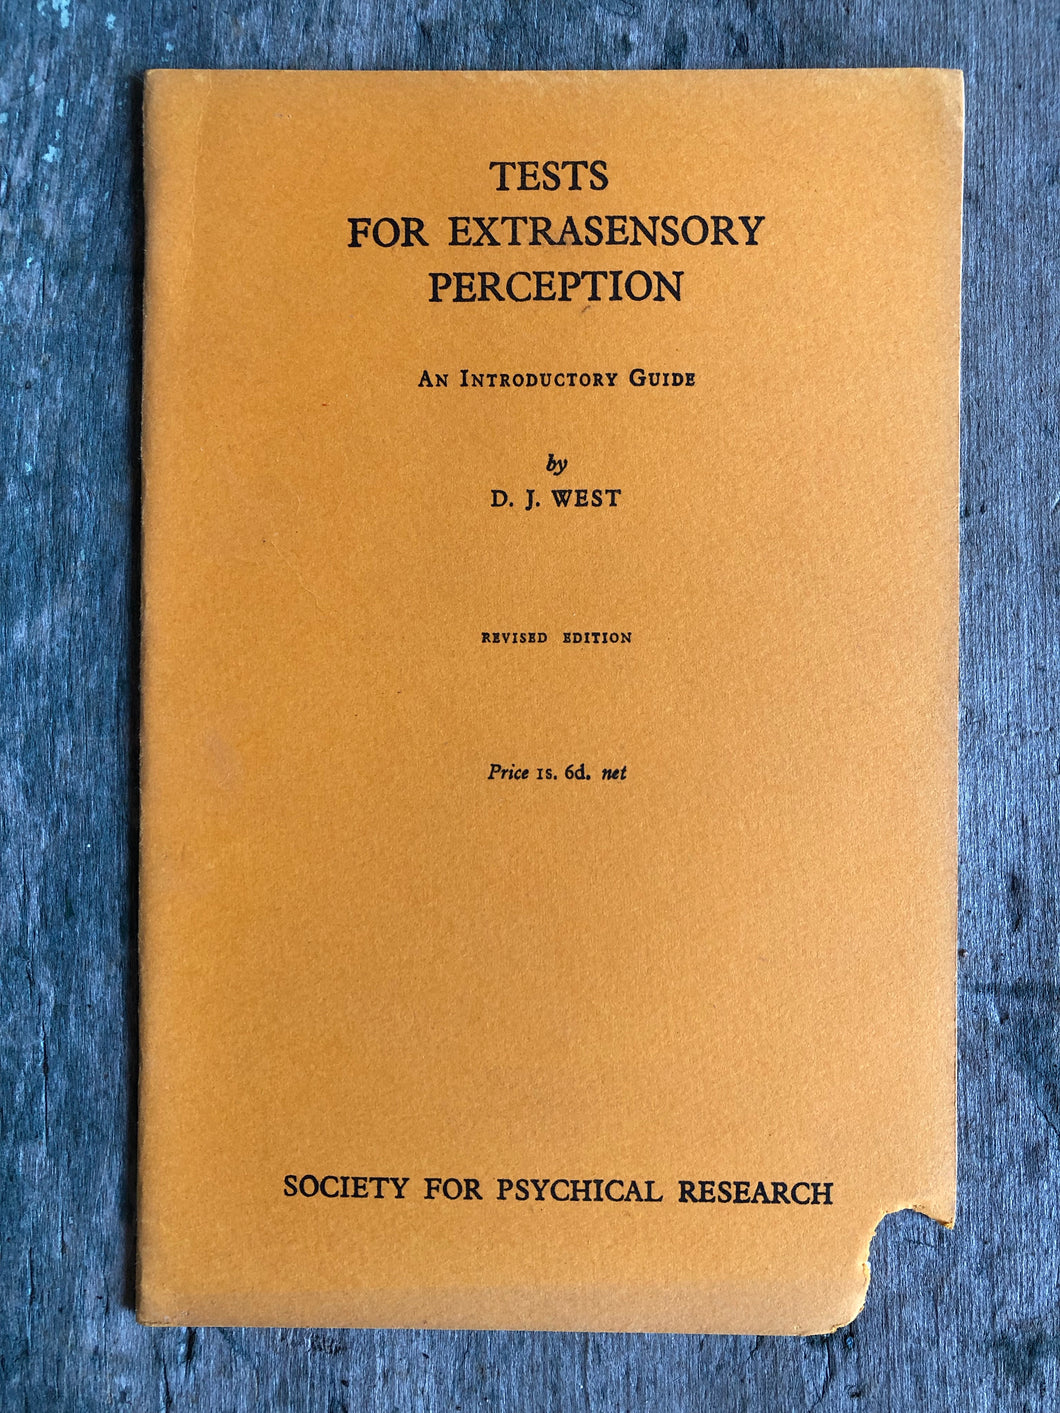 Tests for Extrasensory Perception: An Introductory Guide by D. J. West